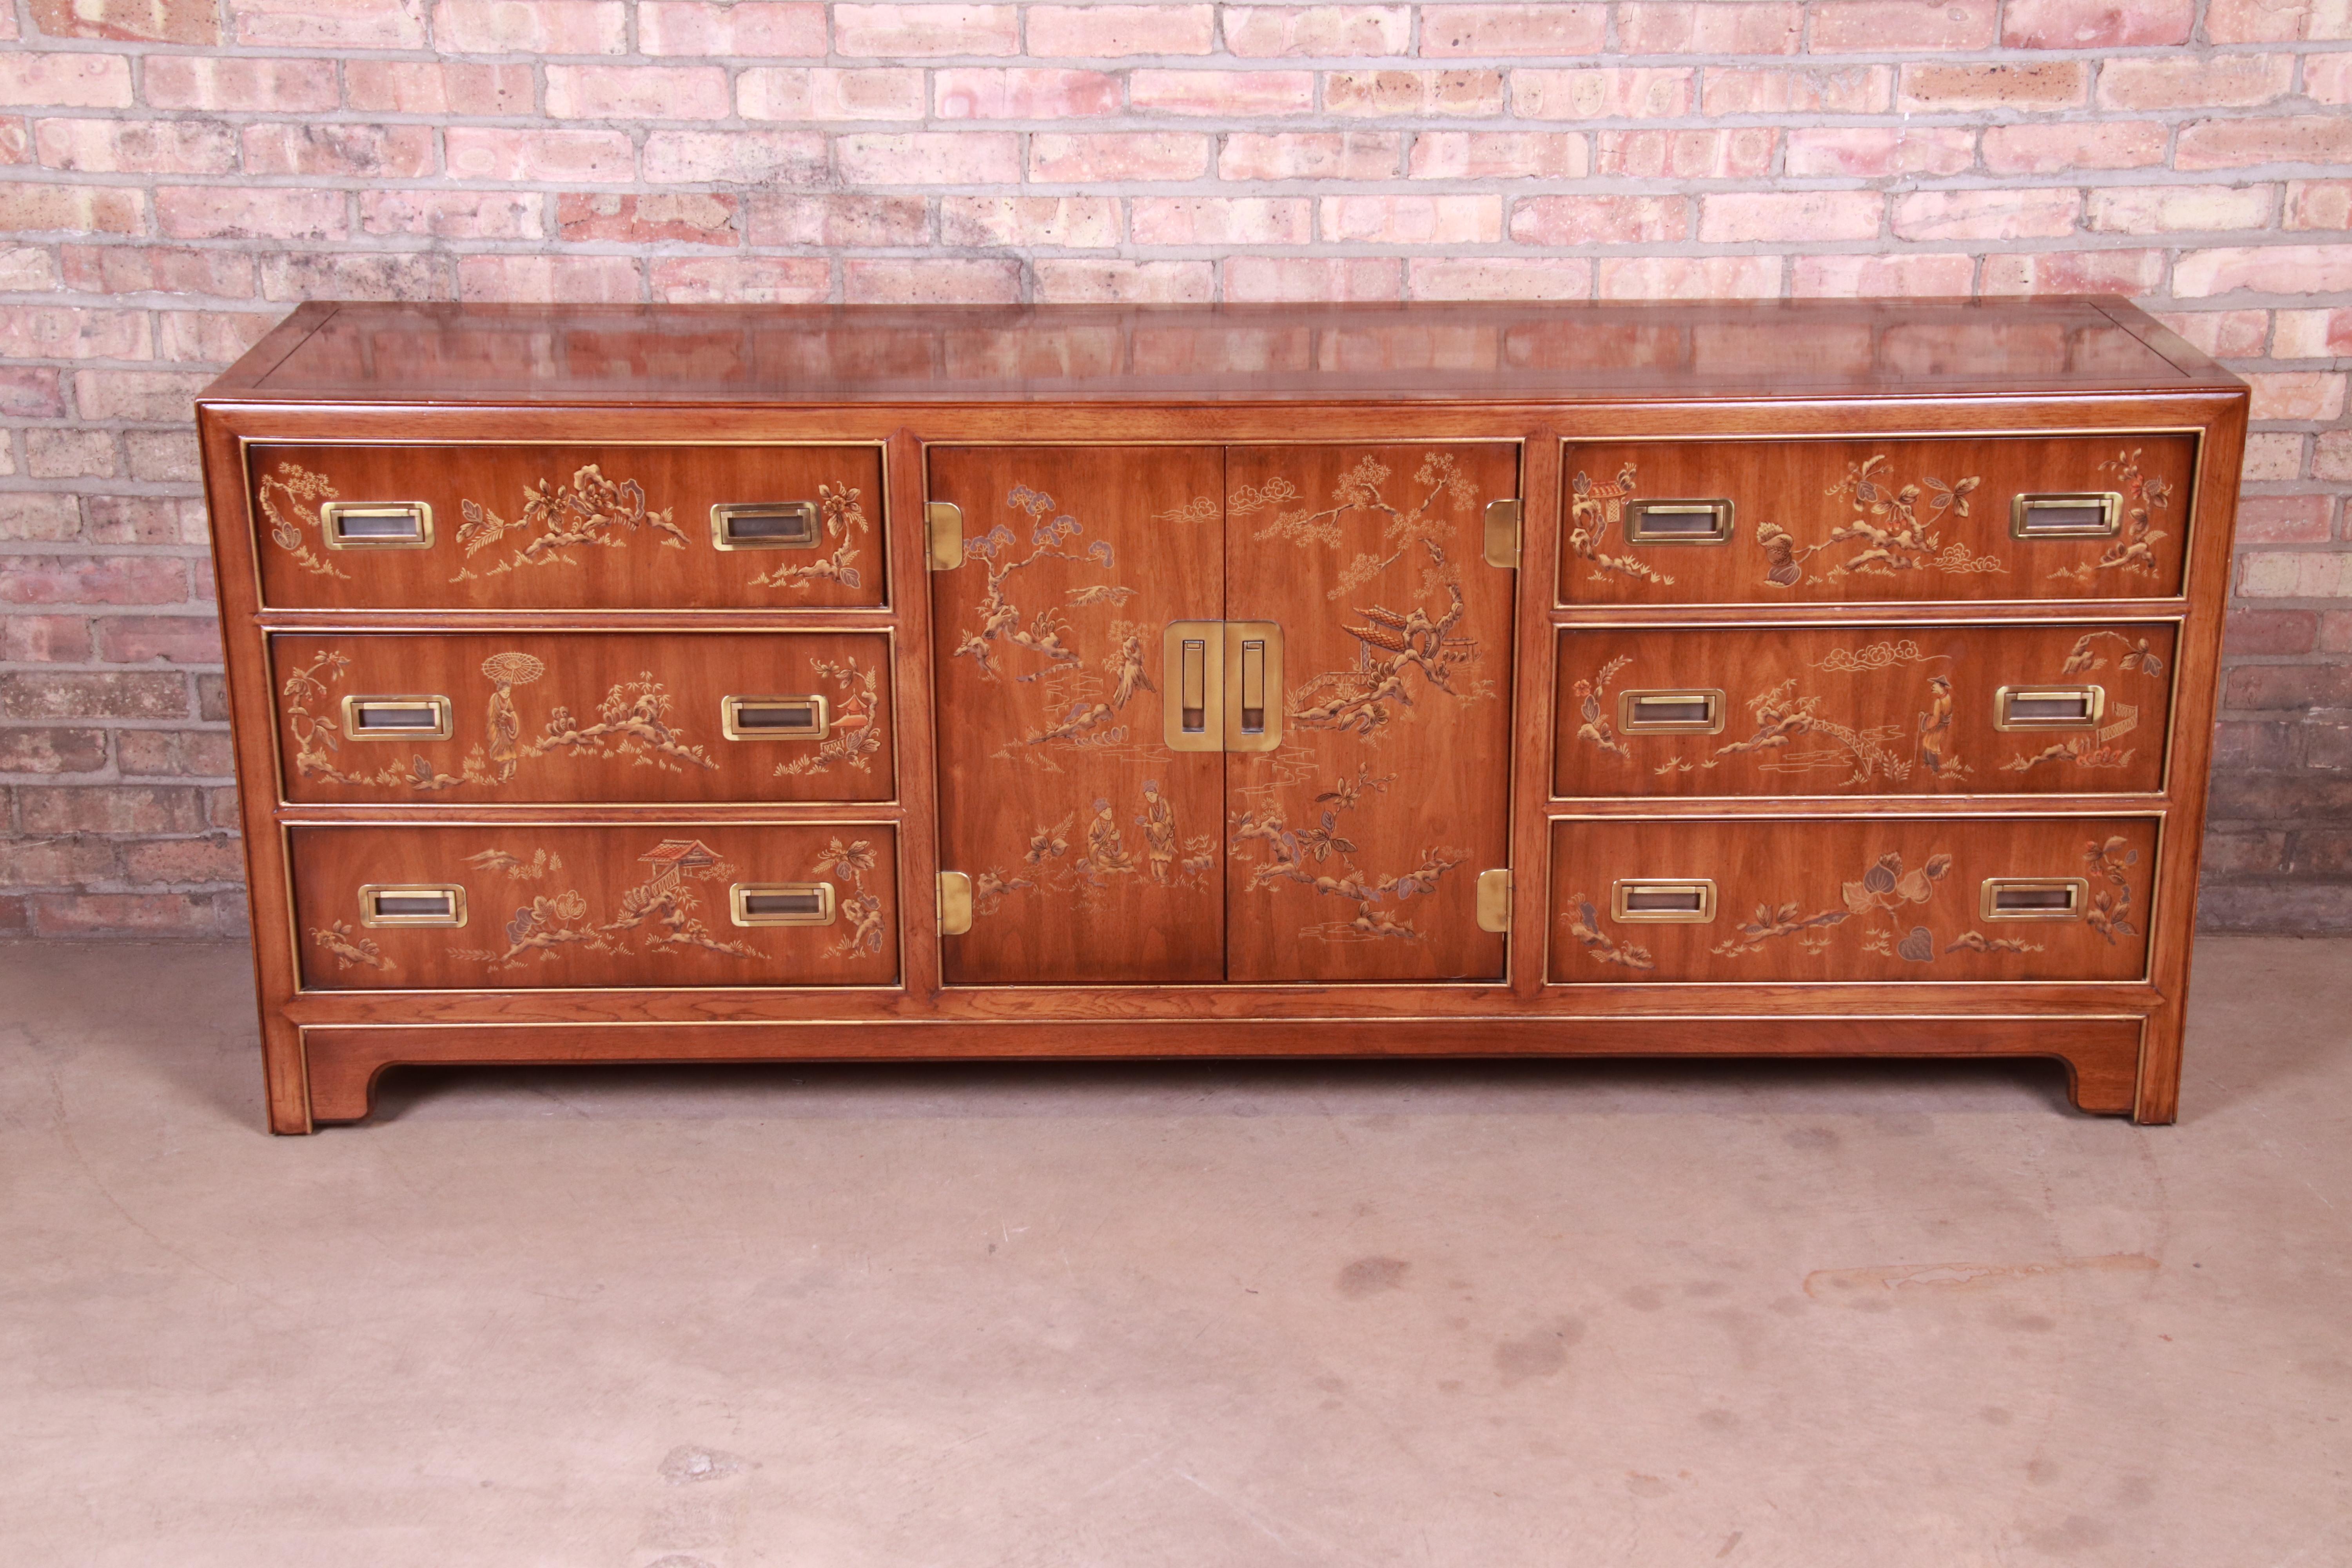 An exceptional midcentury Hollywood Regency Chinoiserie Campaign style nine-drawer long dresser or credenza

By Drexel Heritage 